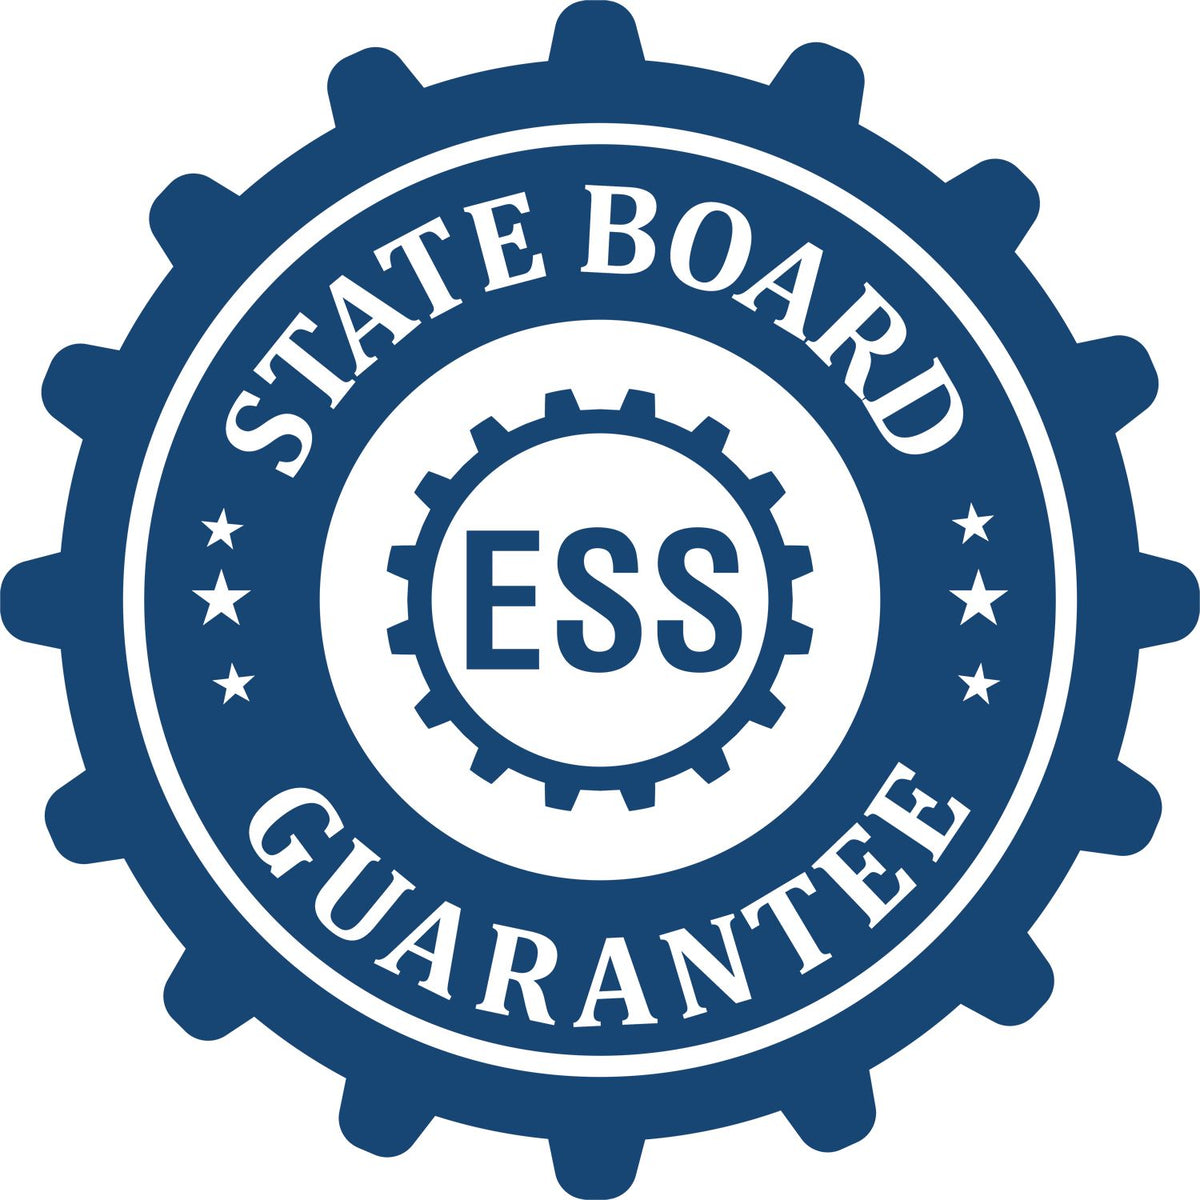 An emblem in a gear shape illustrating a state board guarantee for the State of California Extended Long Reach Engineer Seal product.